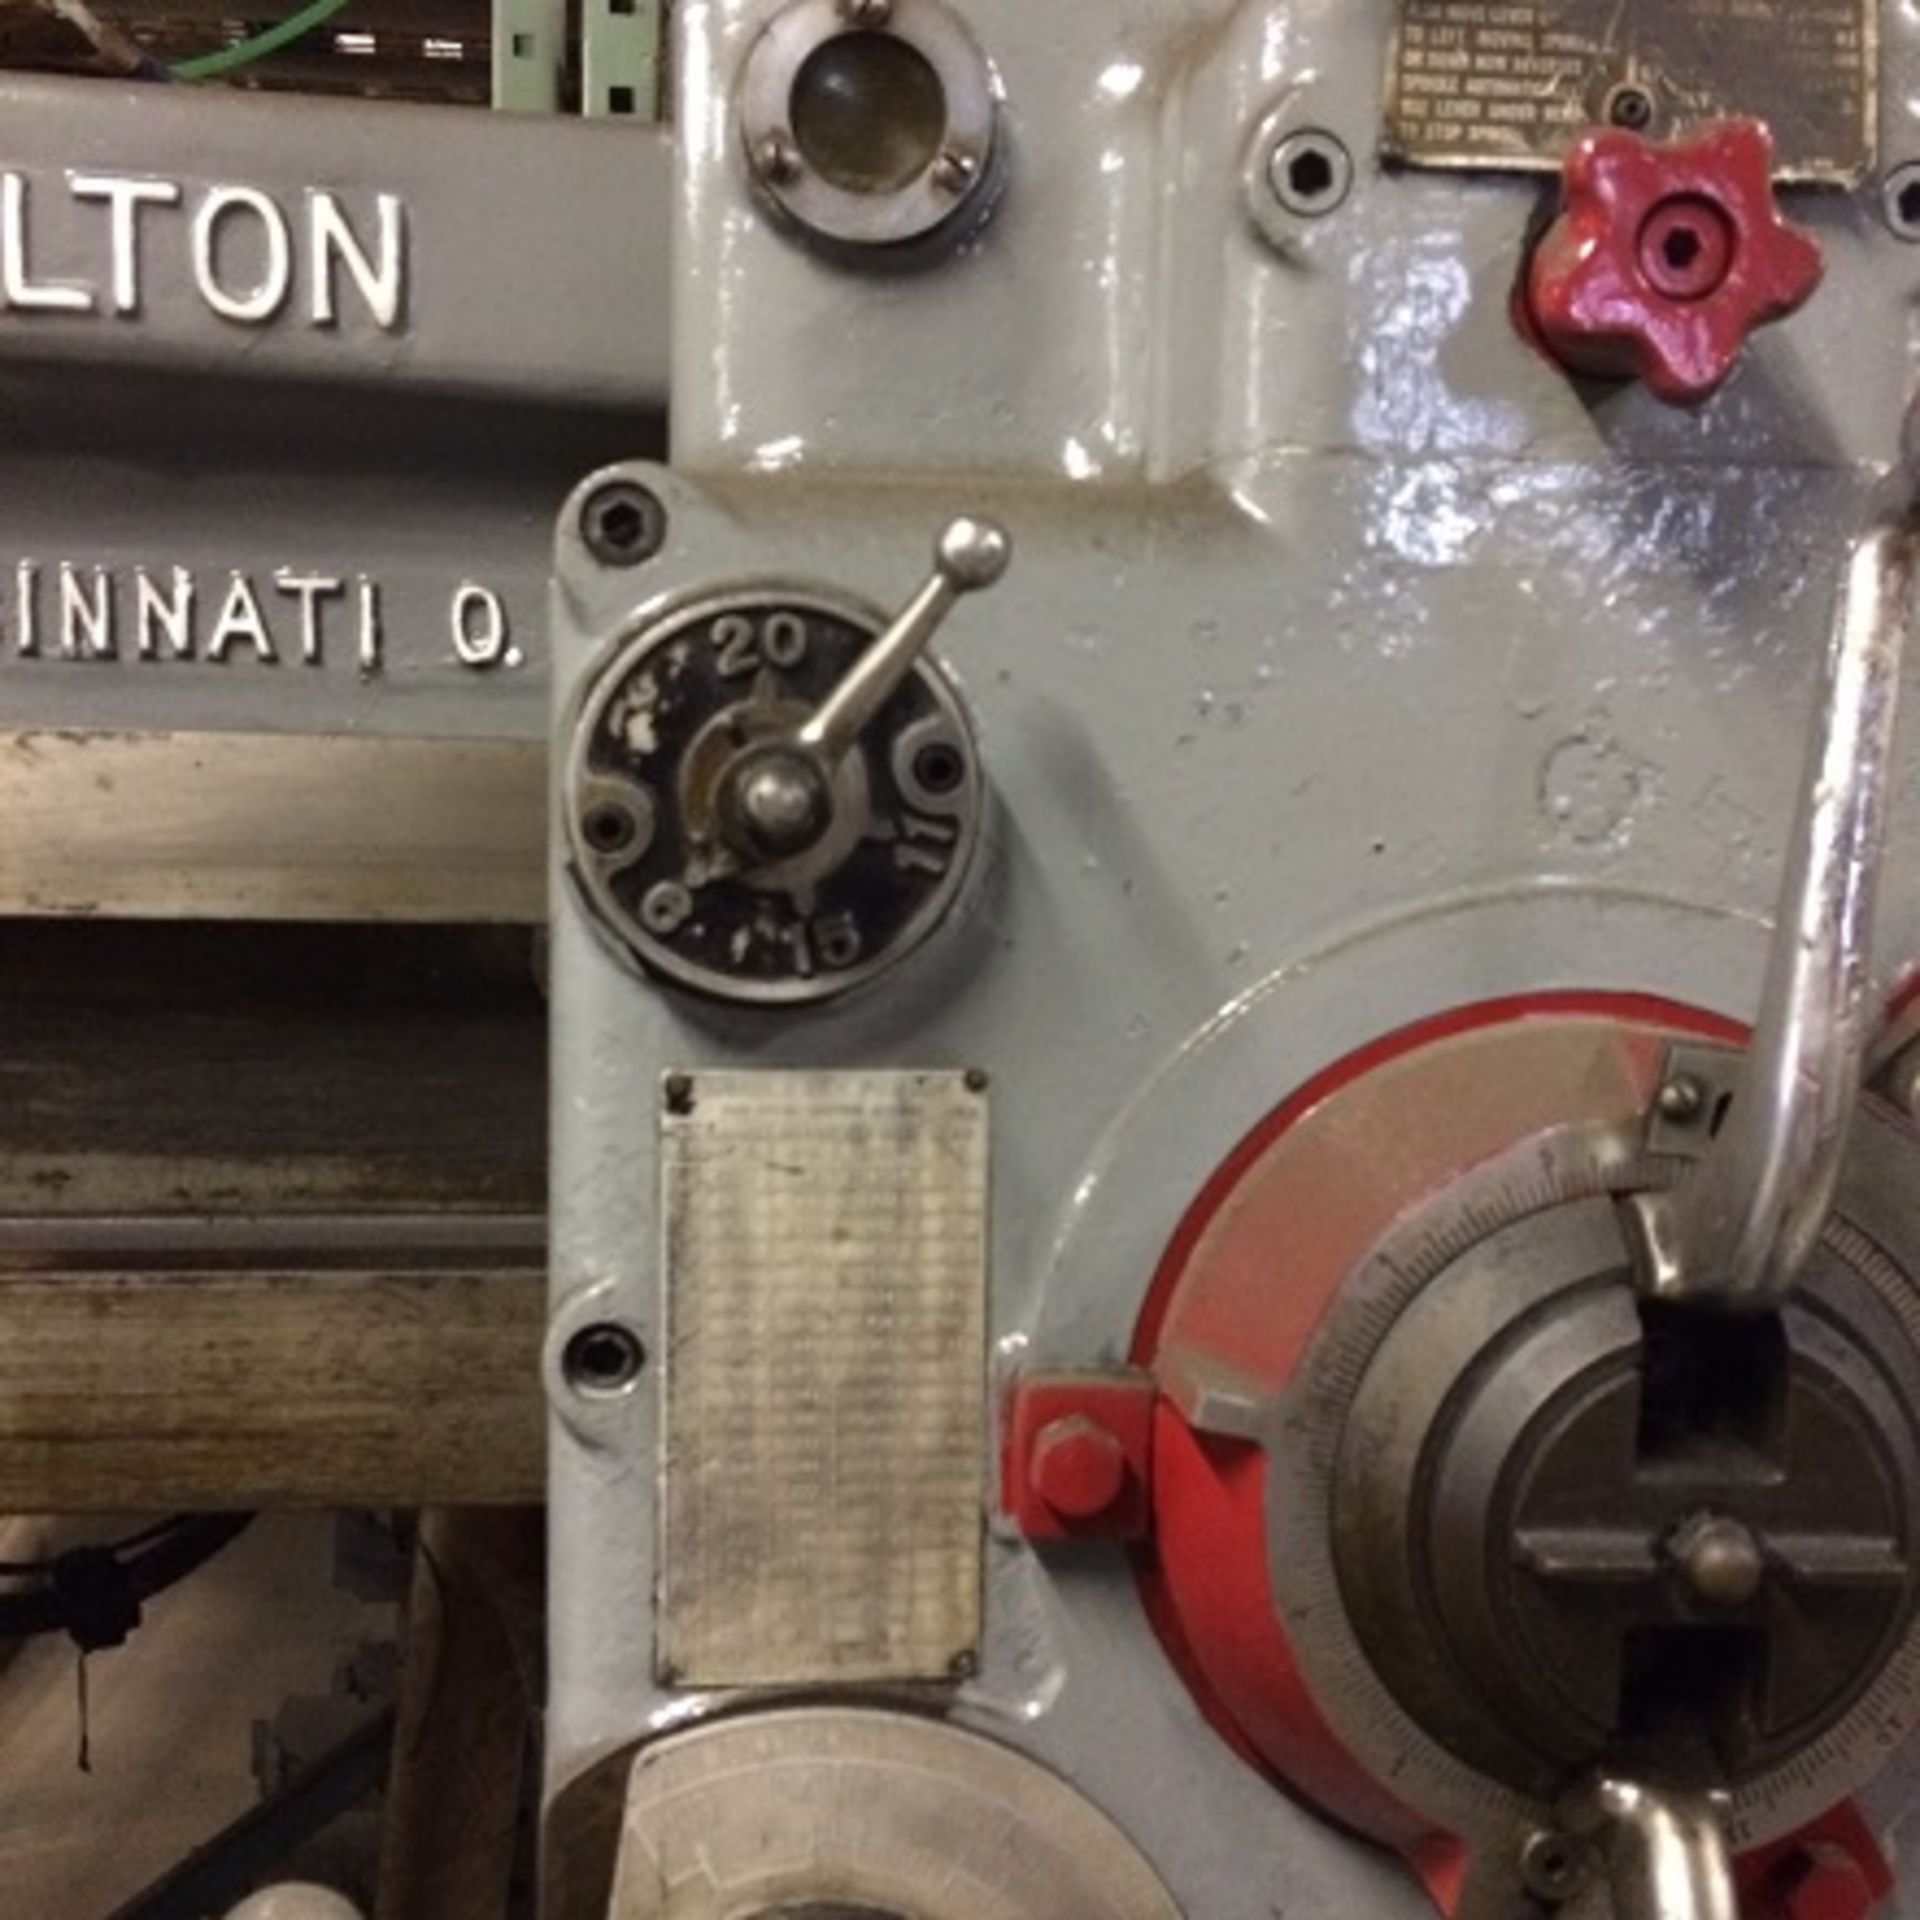 Carlton 4 Ft. X 9 In. Radial Arm Drill, No Loading Fee, Location, Florence, Kentucky - Image 3 of 3